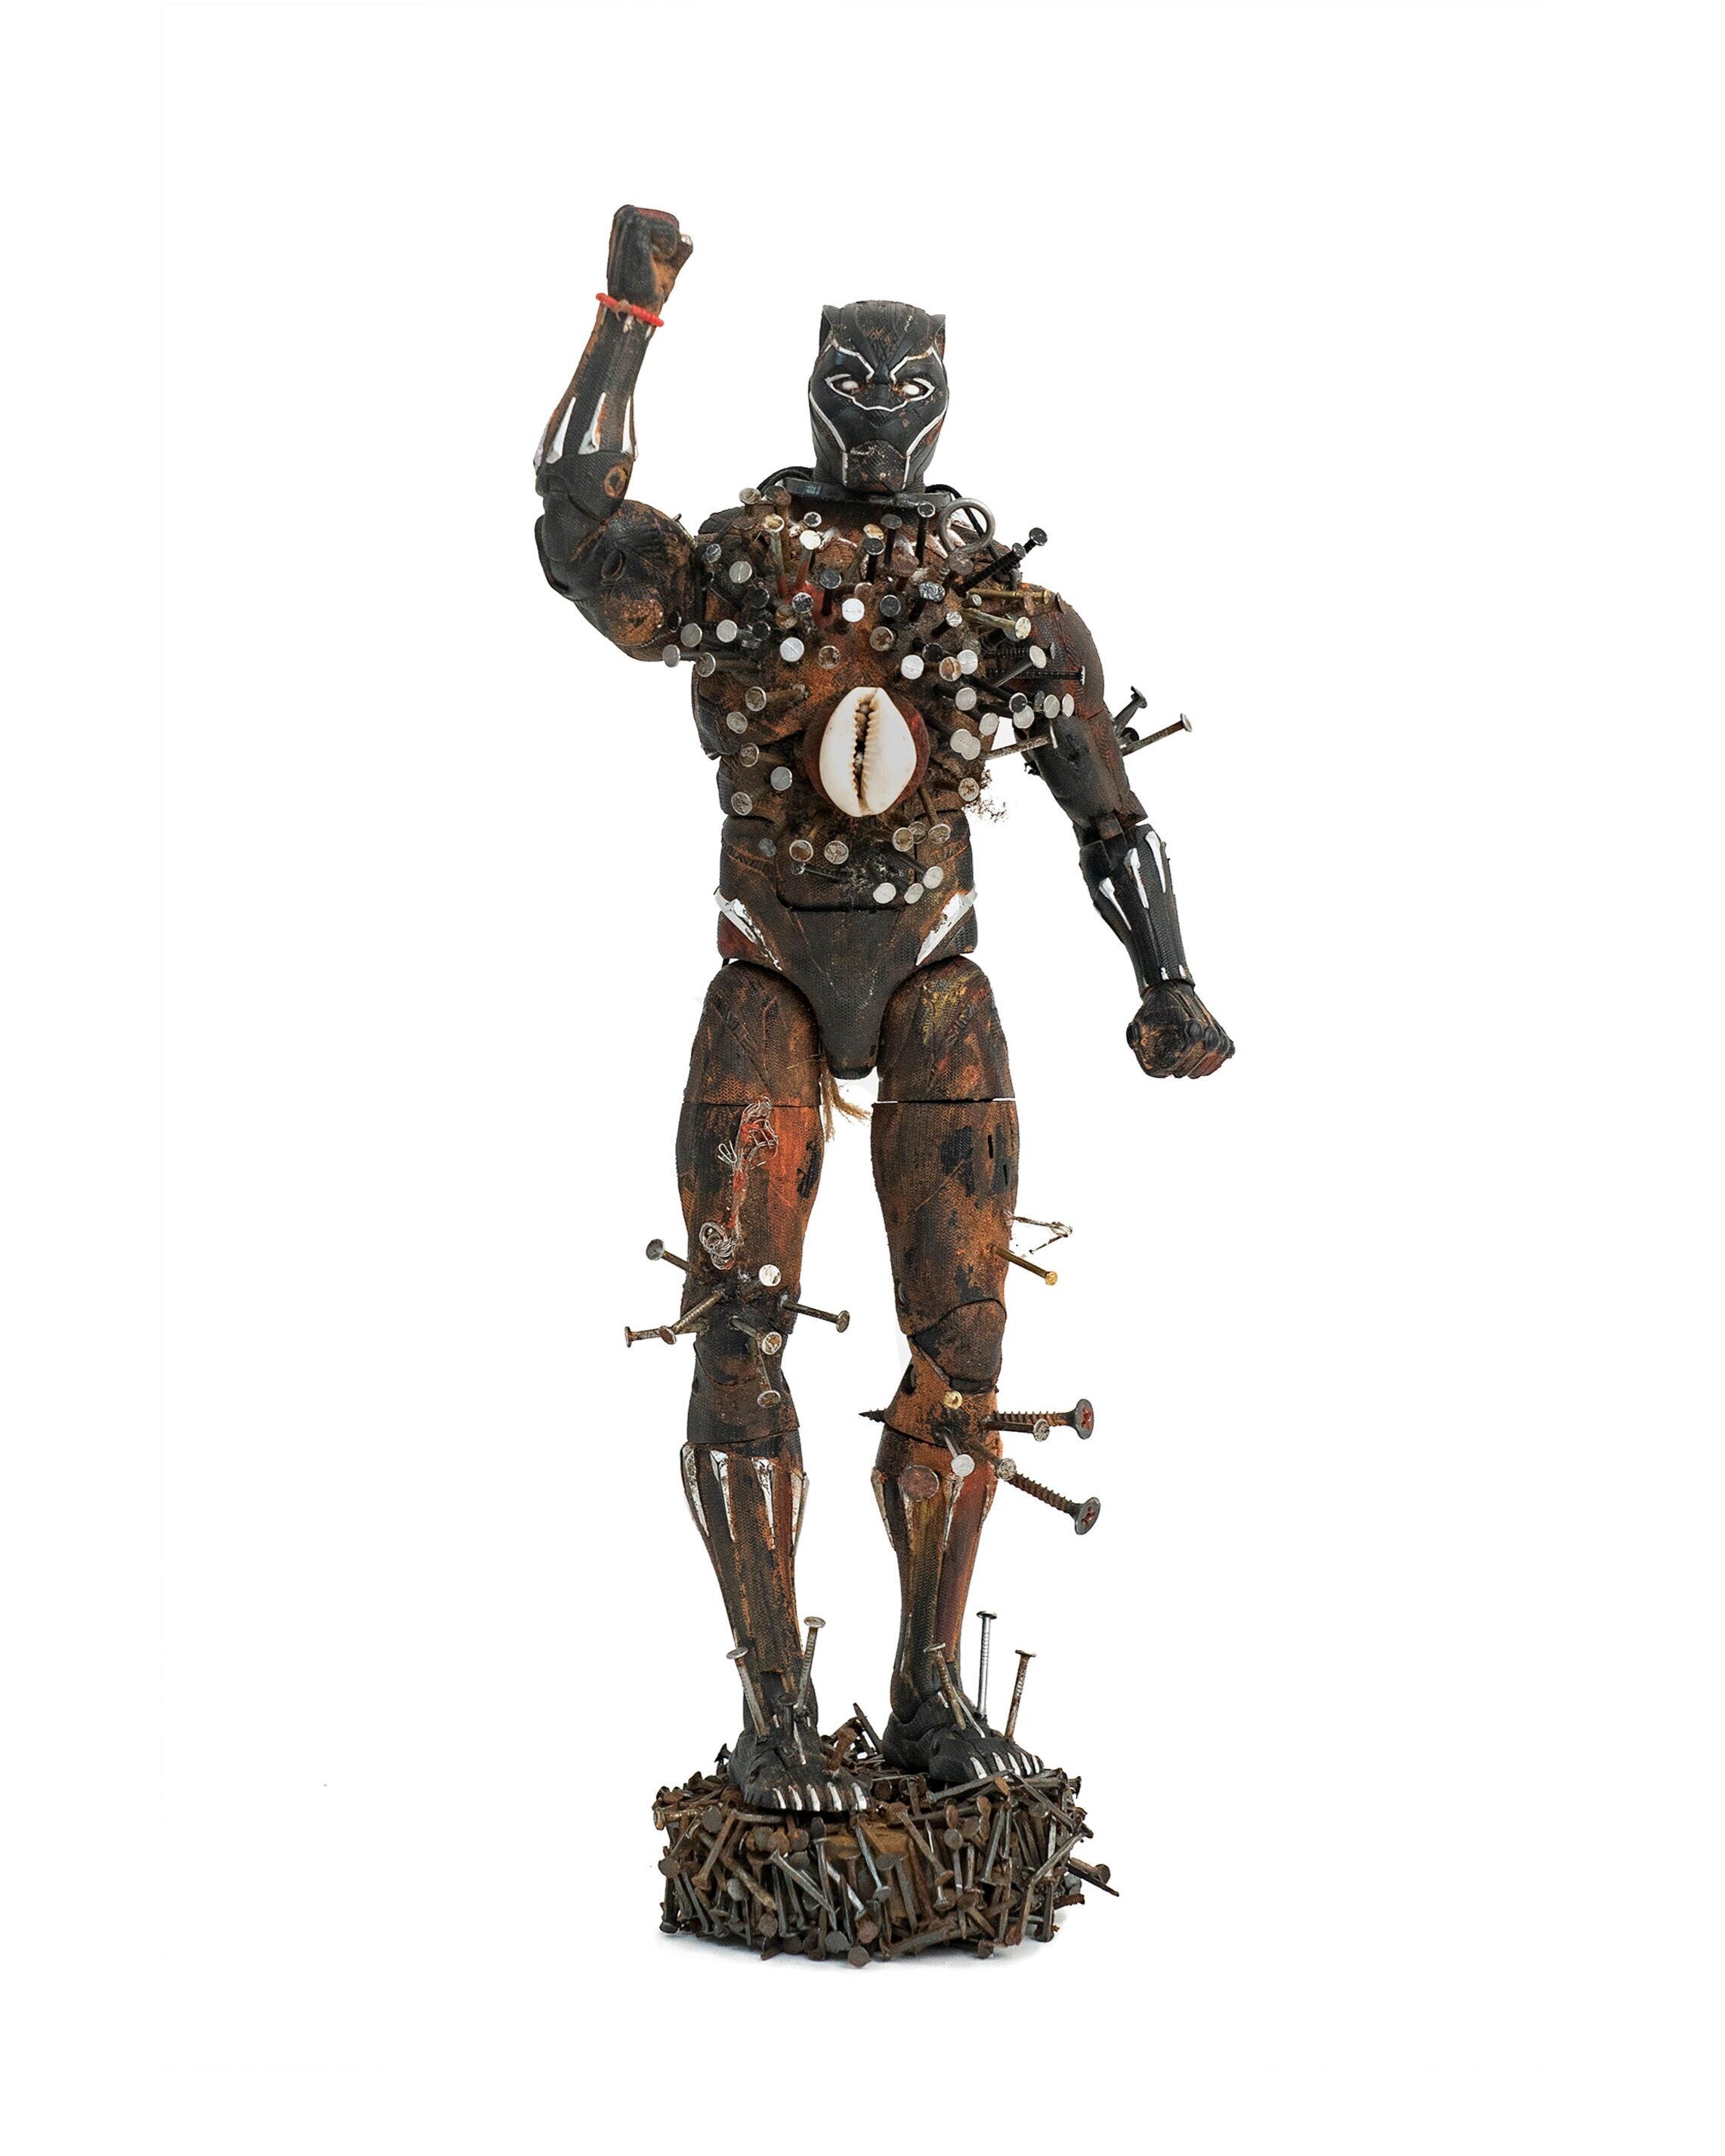  Power figure for the American Negro, 2020                                                                 Earth, nails, leather, cowry shell, beads, hair, plant fiber, magnet                                                                           